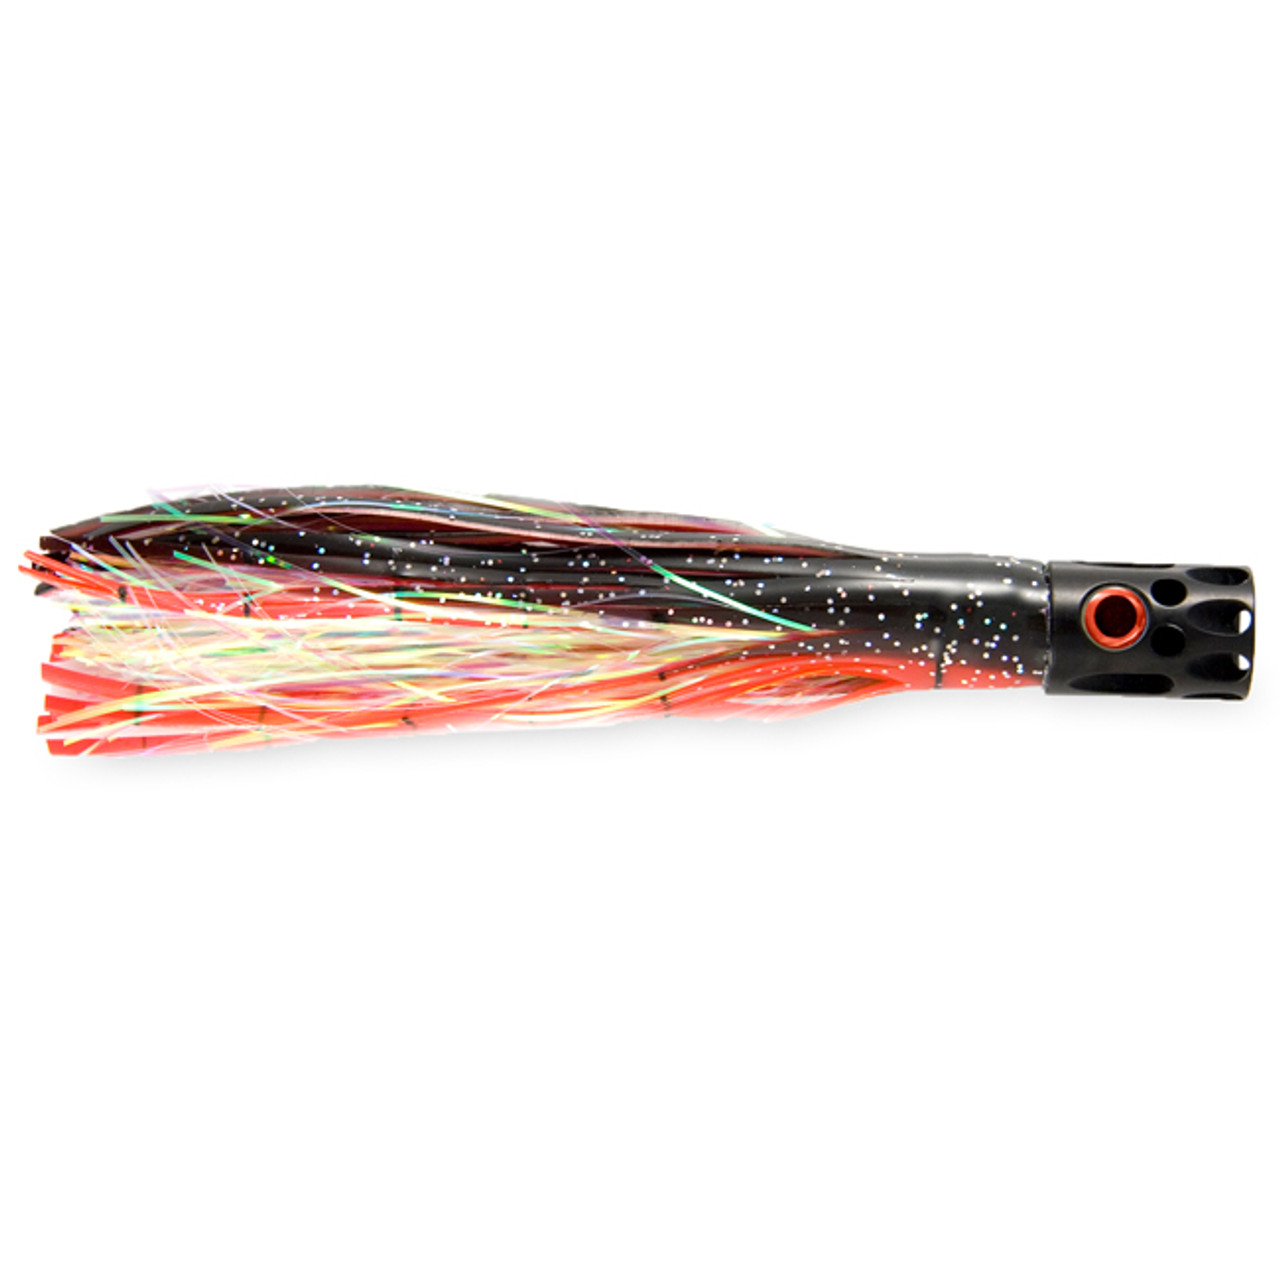 Billy Baits - Magnum Turbo Whistler Lure - FISH307.com